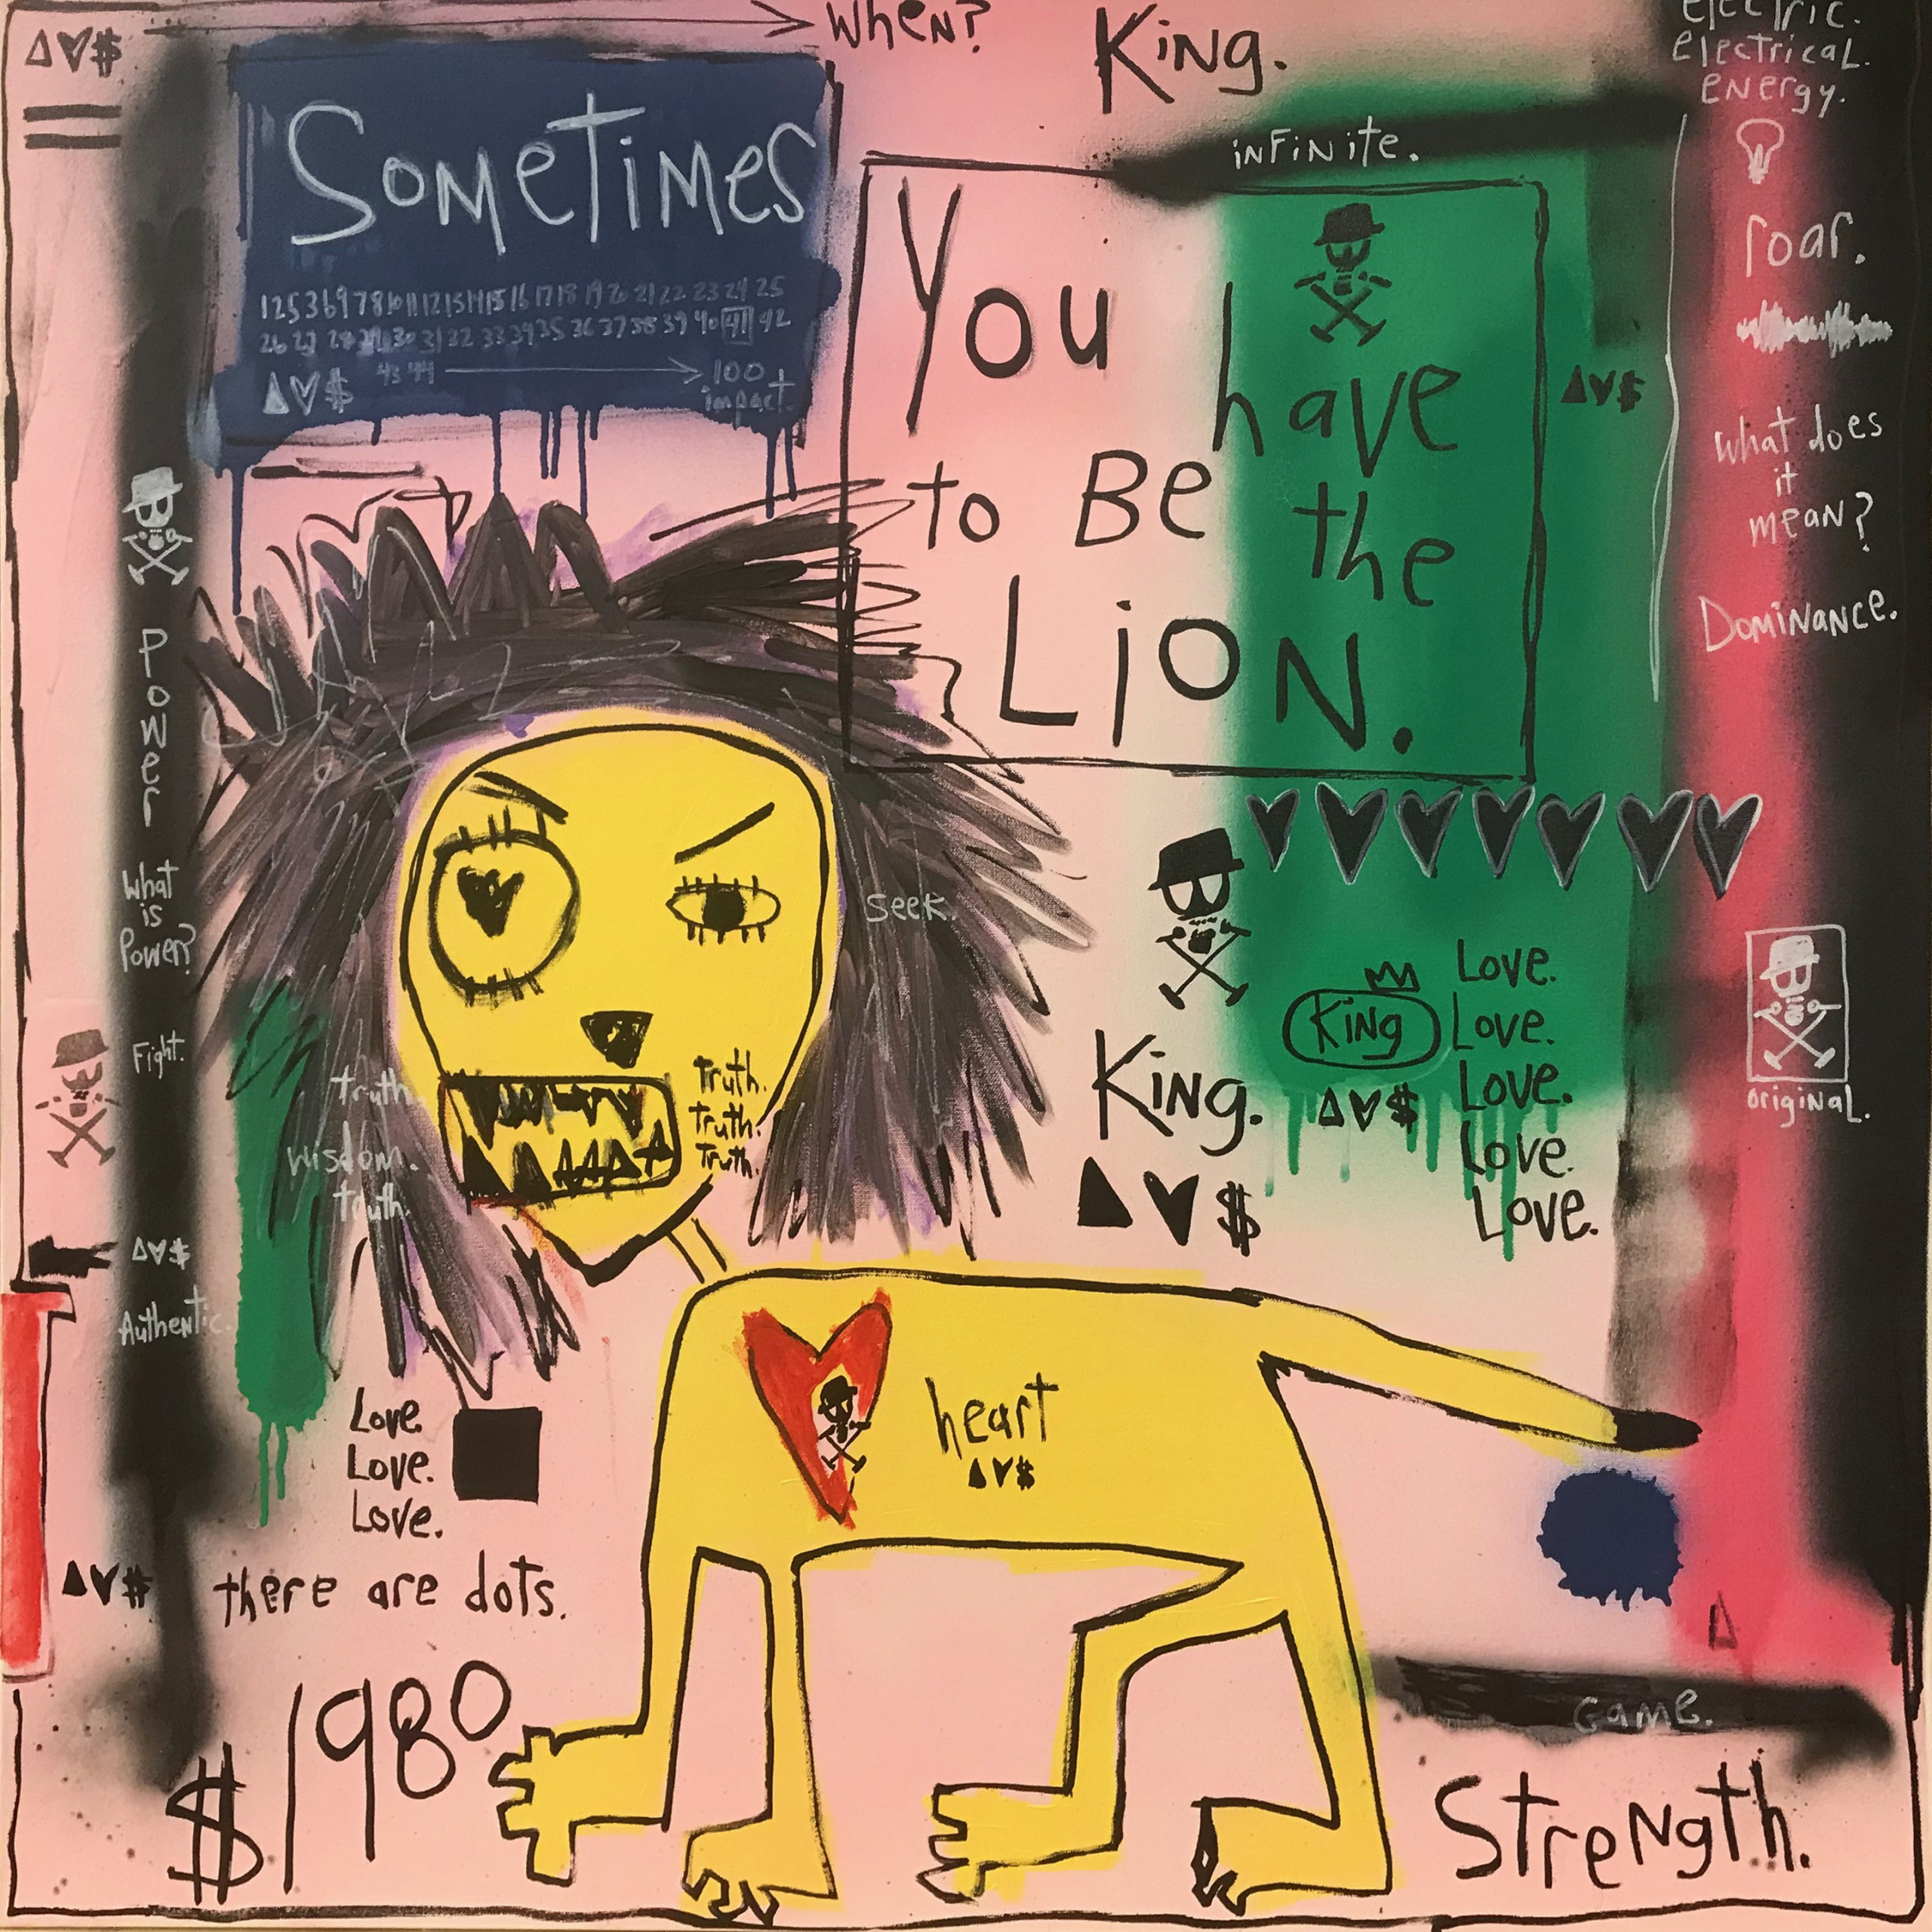 "Sometimes You Have to Be the Lion" by Adam Baranello